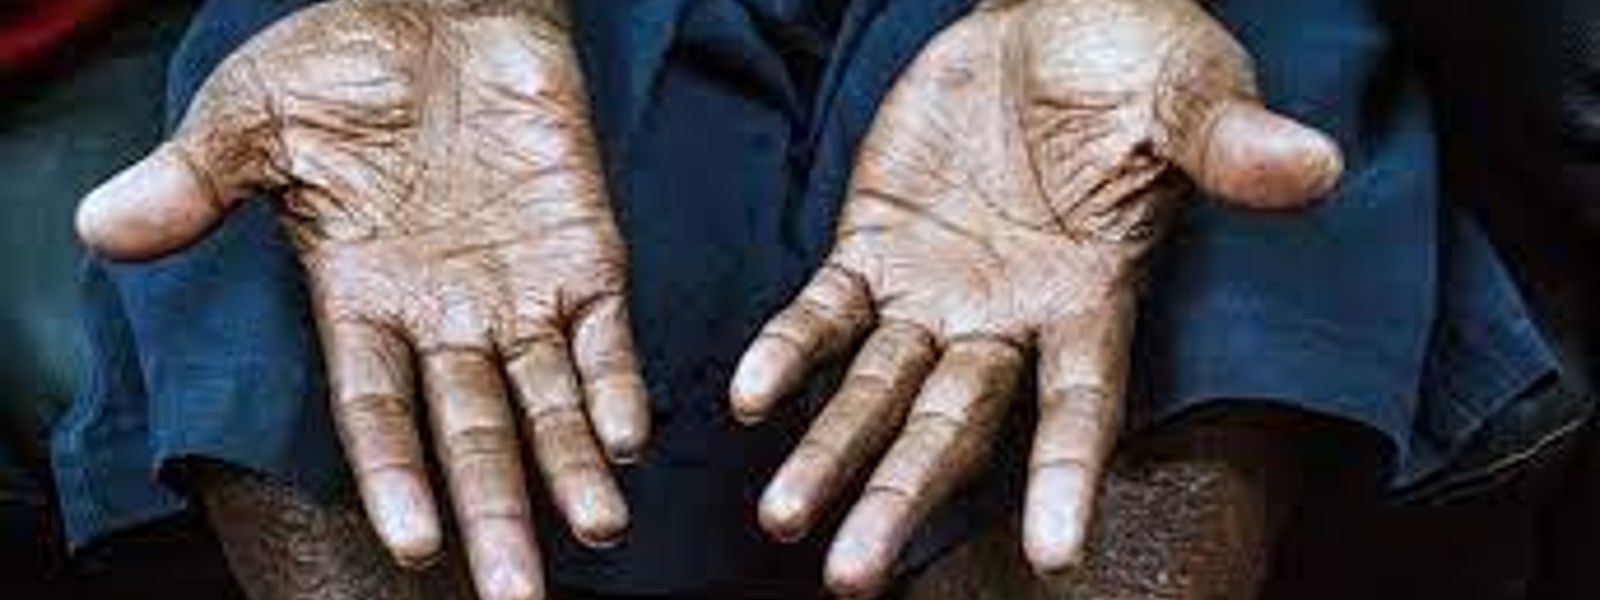 350+ leprosy patients reported in 2022